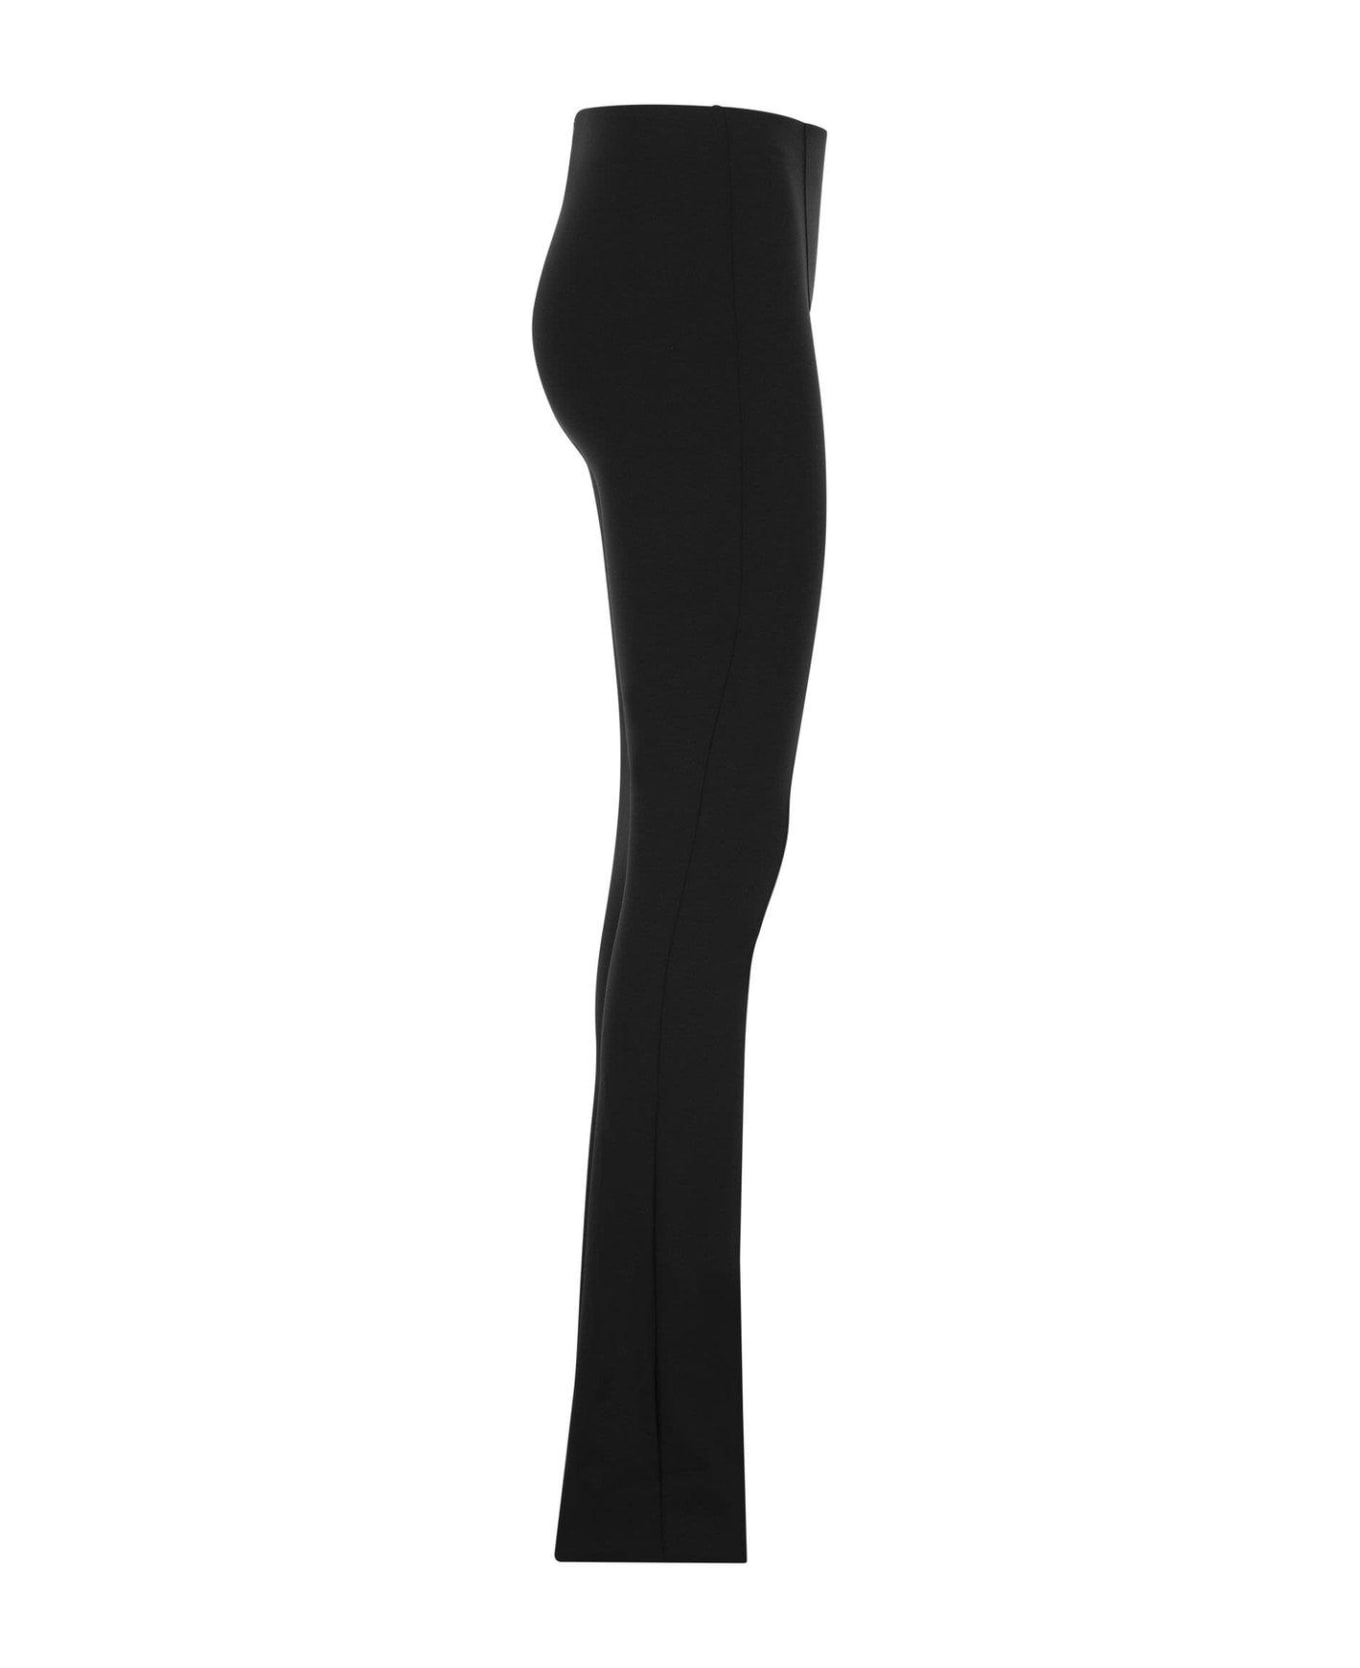 SportMax Mid-rise Flared Trousers - Nero